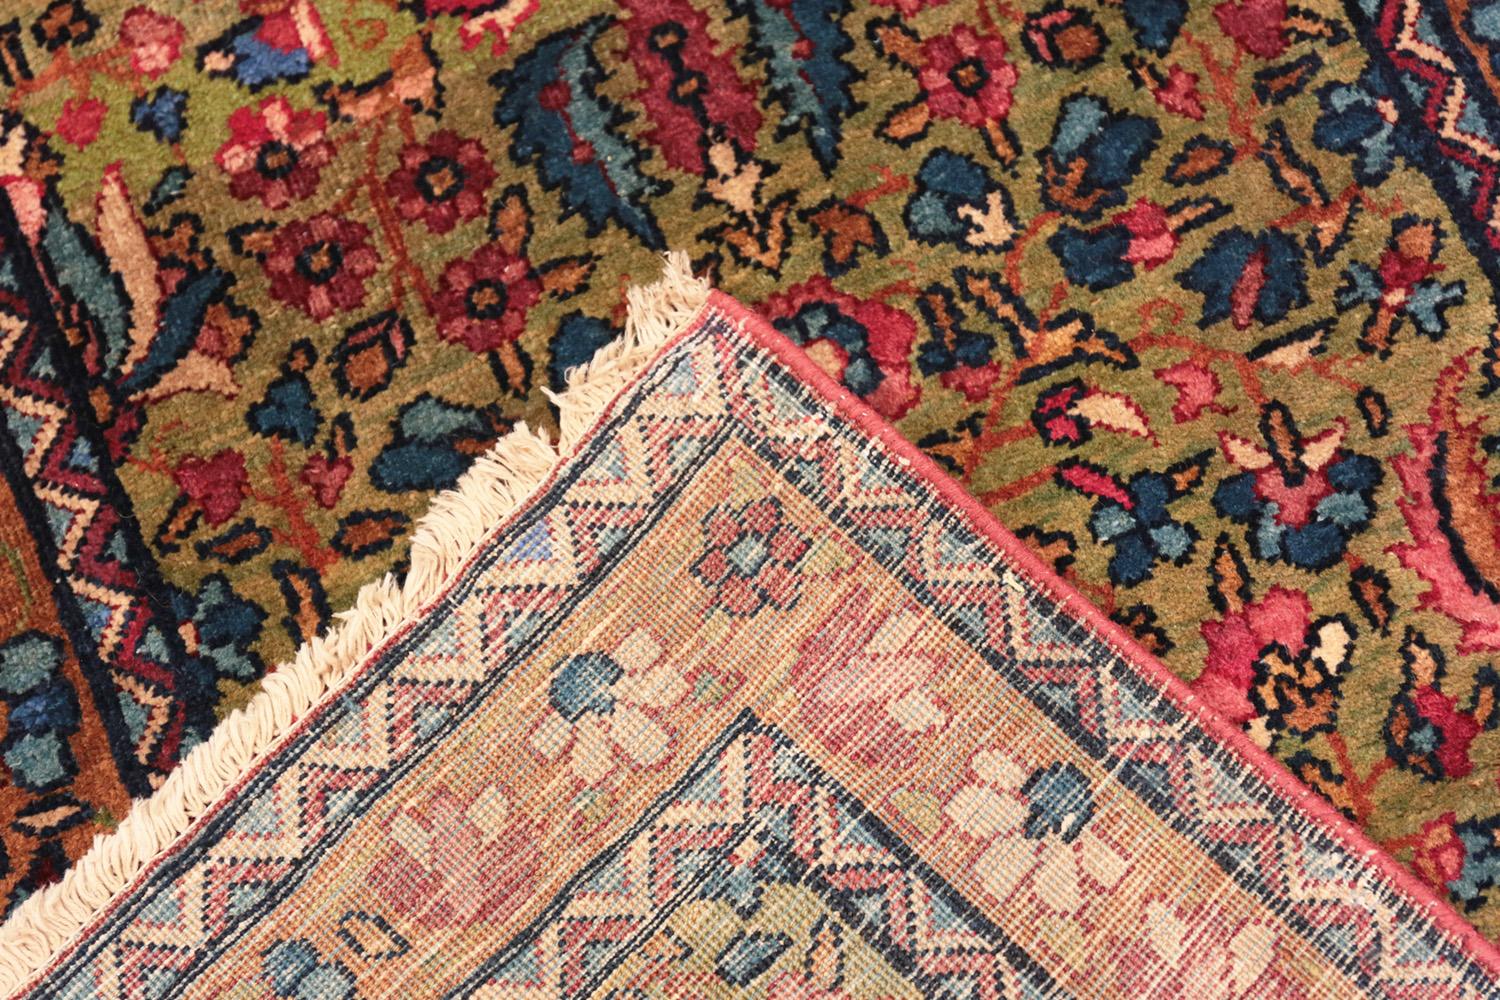 Hand-Knotted Long Floral Antique Persian Kerman Runner Rug. Size: 2 ft 2 in x 22 ft 6 in